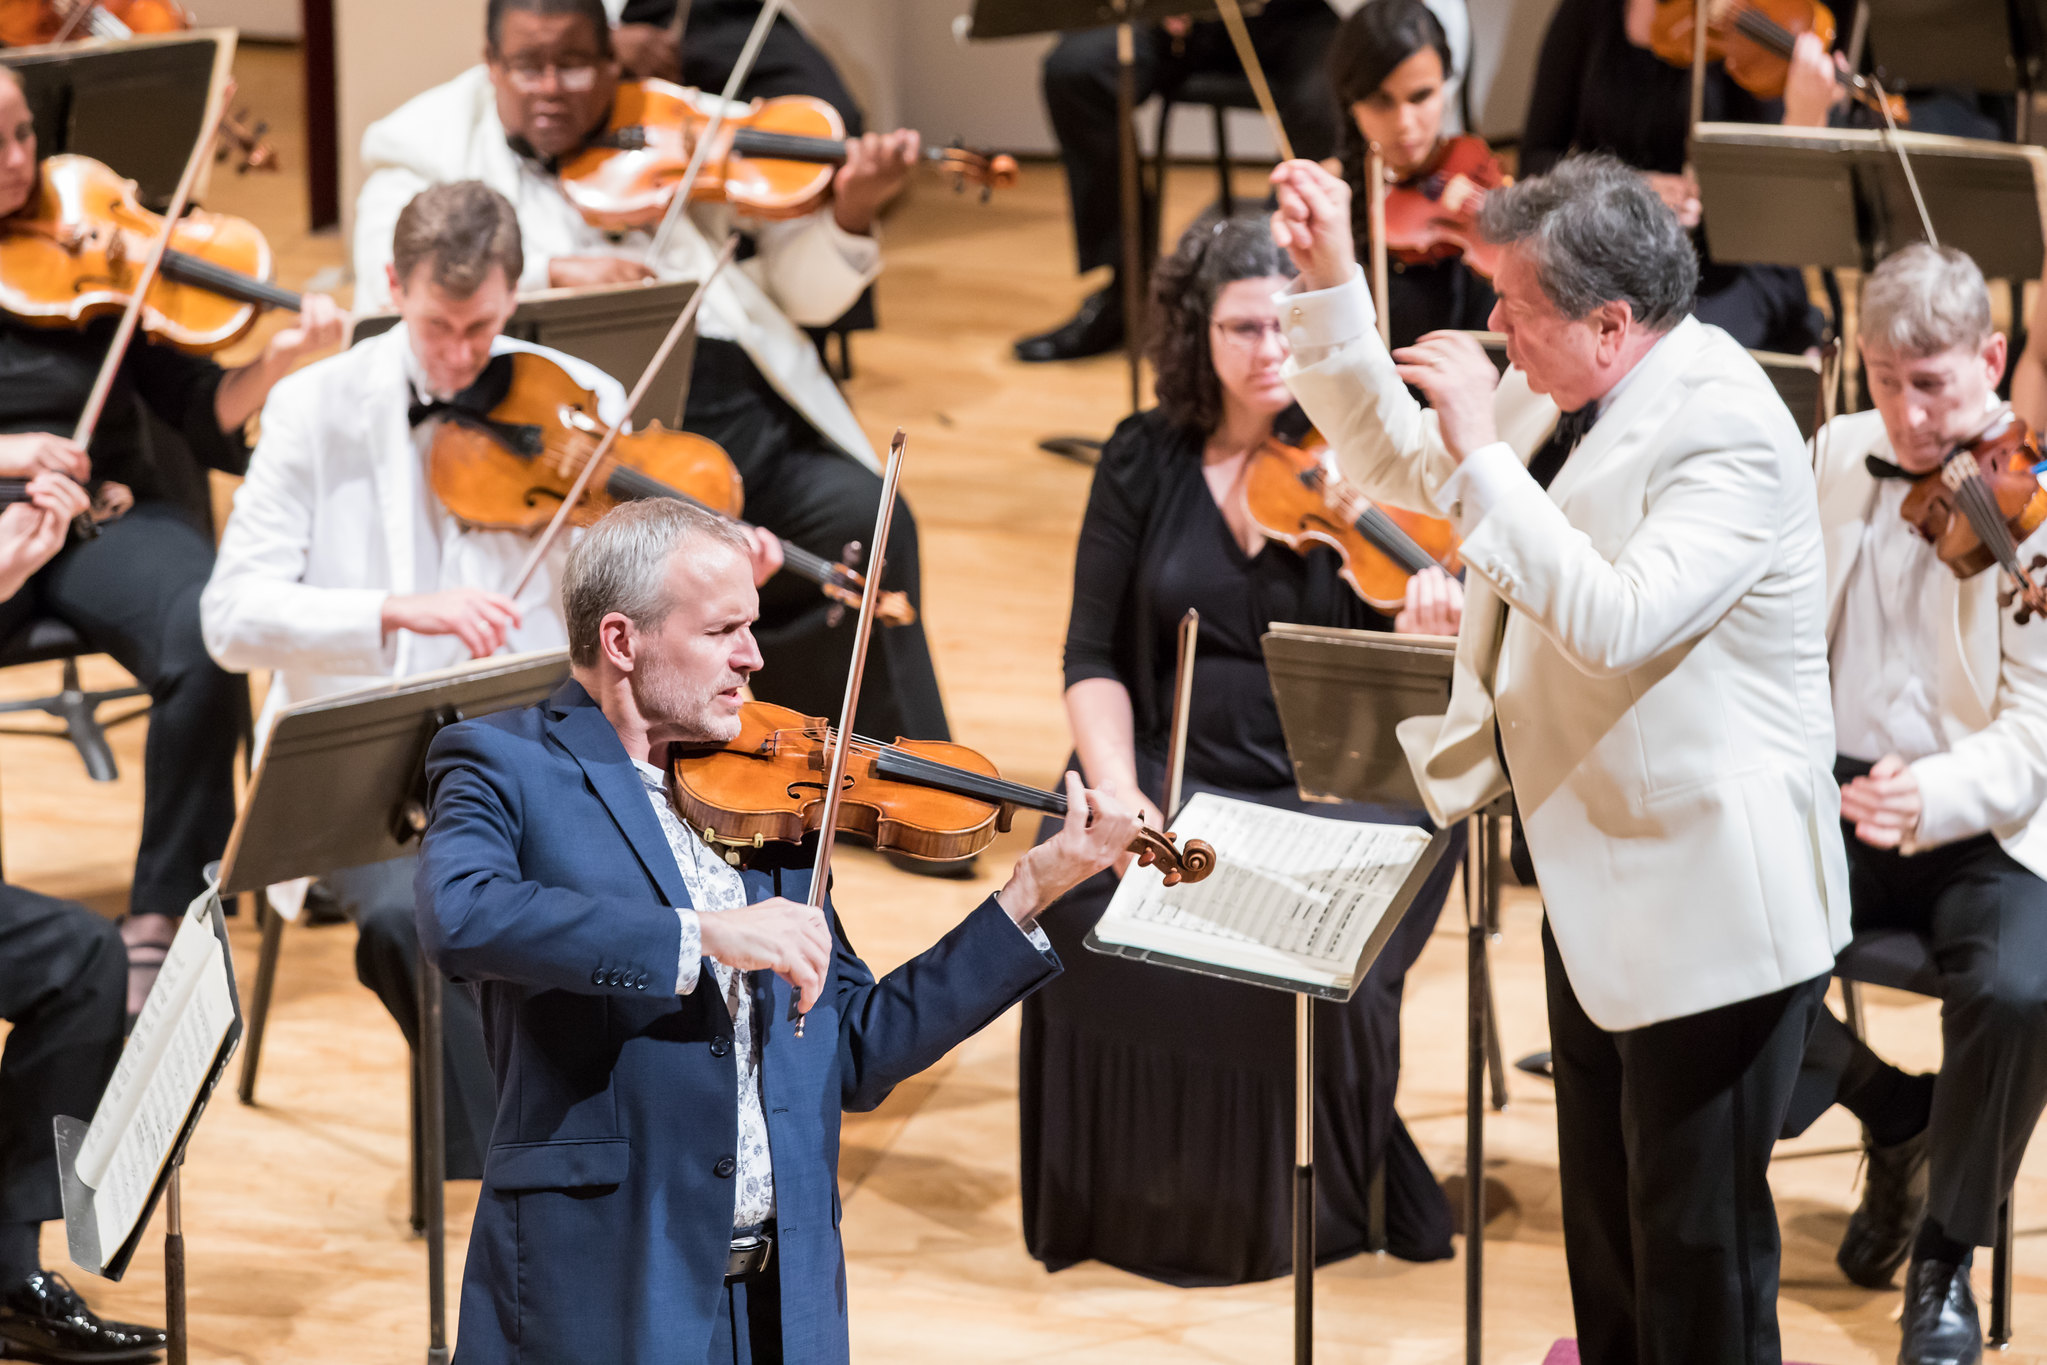 Violinist Jeff Multer in blue jacket performing music with Eastern Festival Orchestra led by conductor Gerard Schwarz